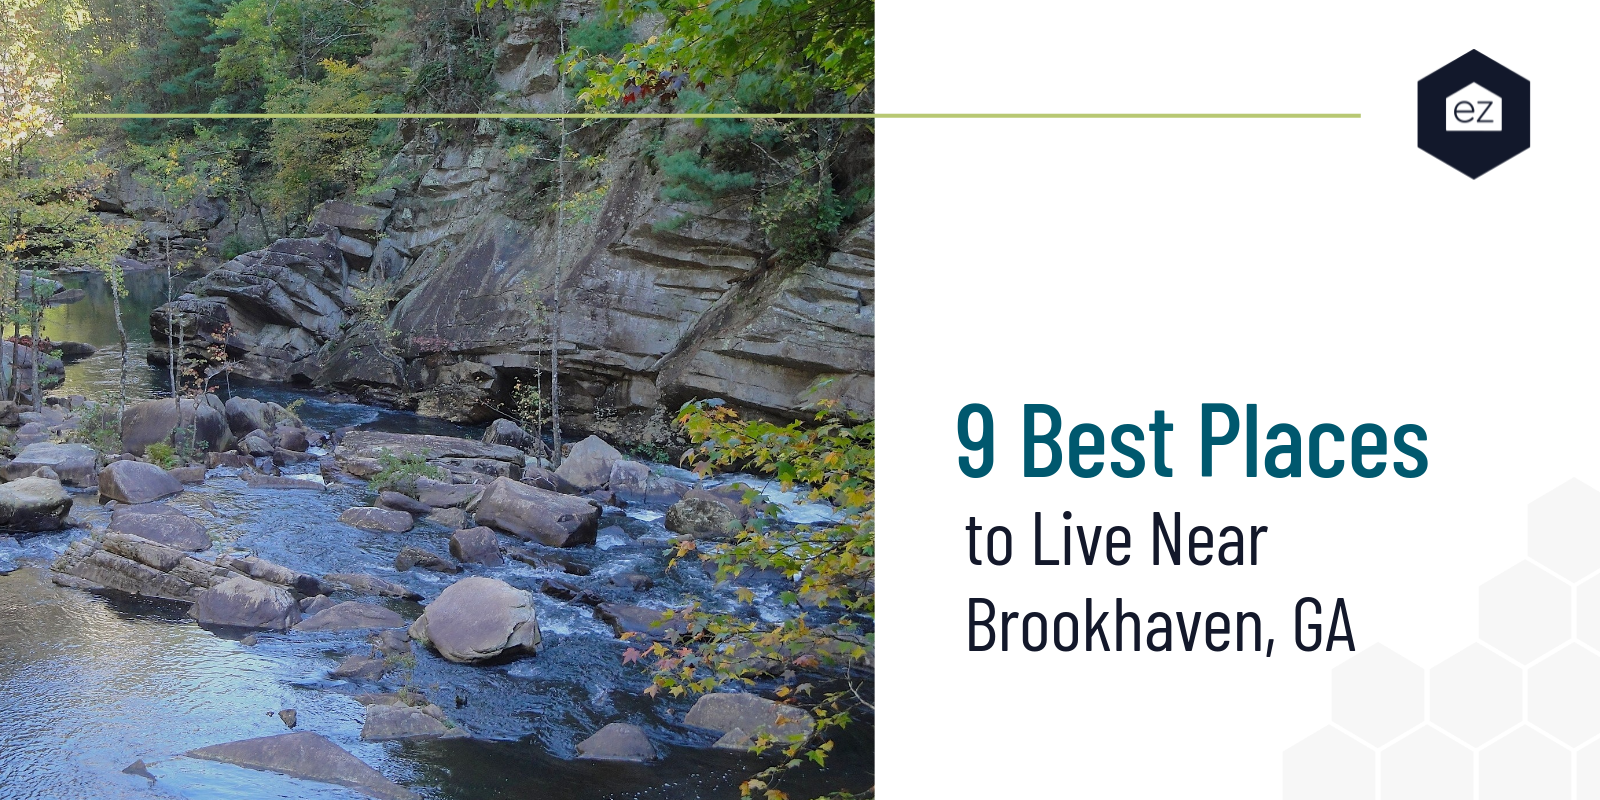 9 Best Places to Live in Brookhaven, GA